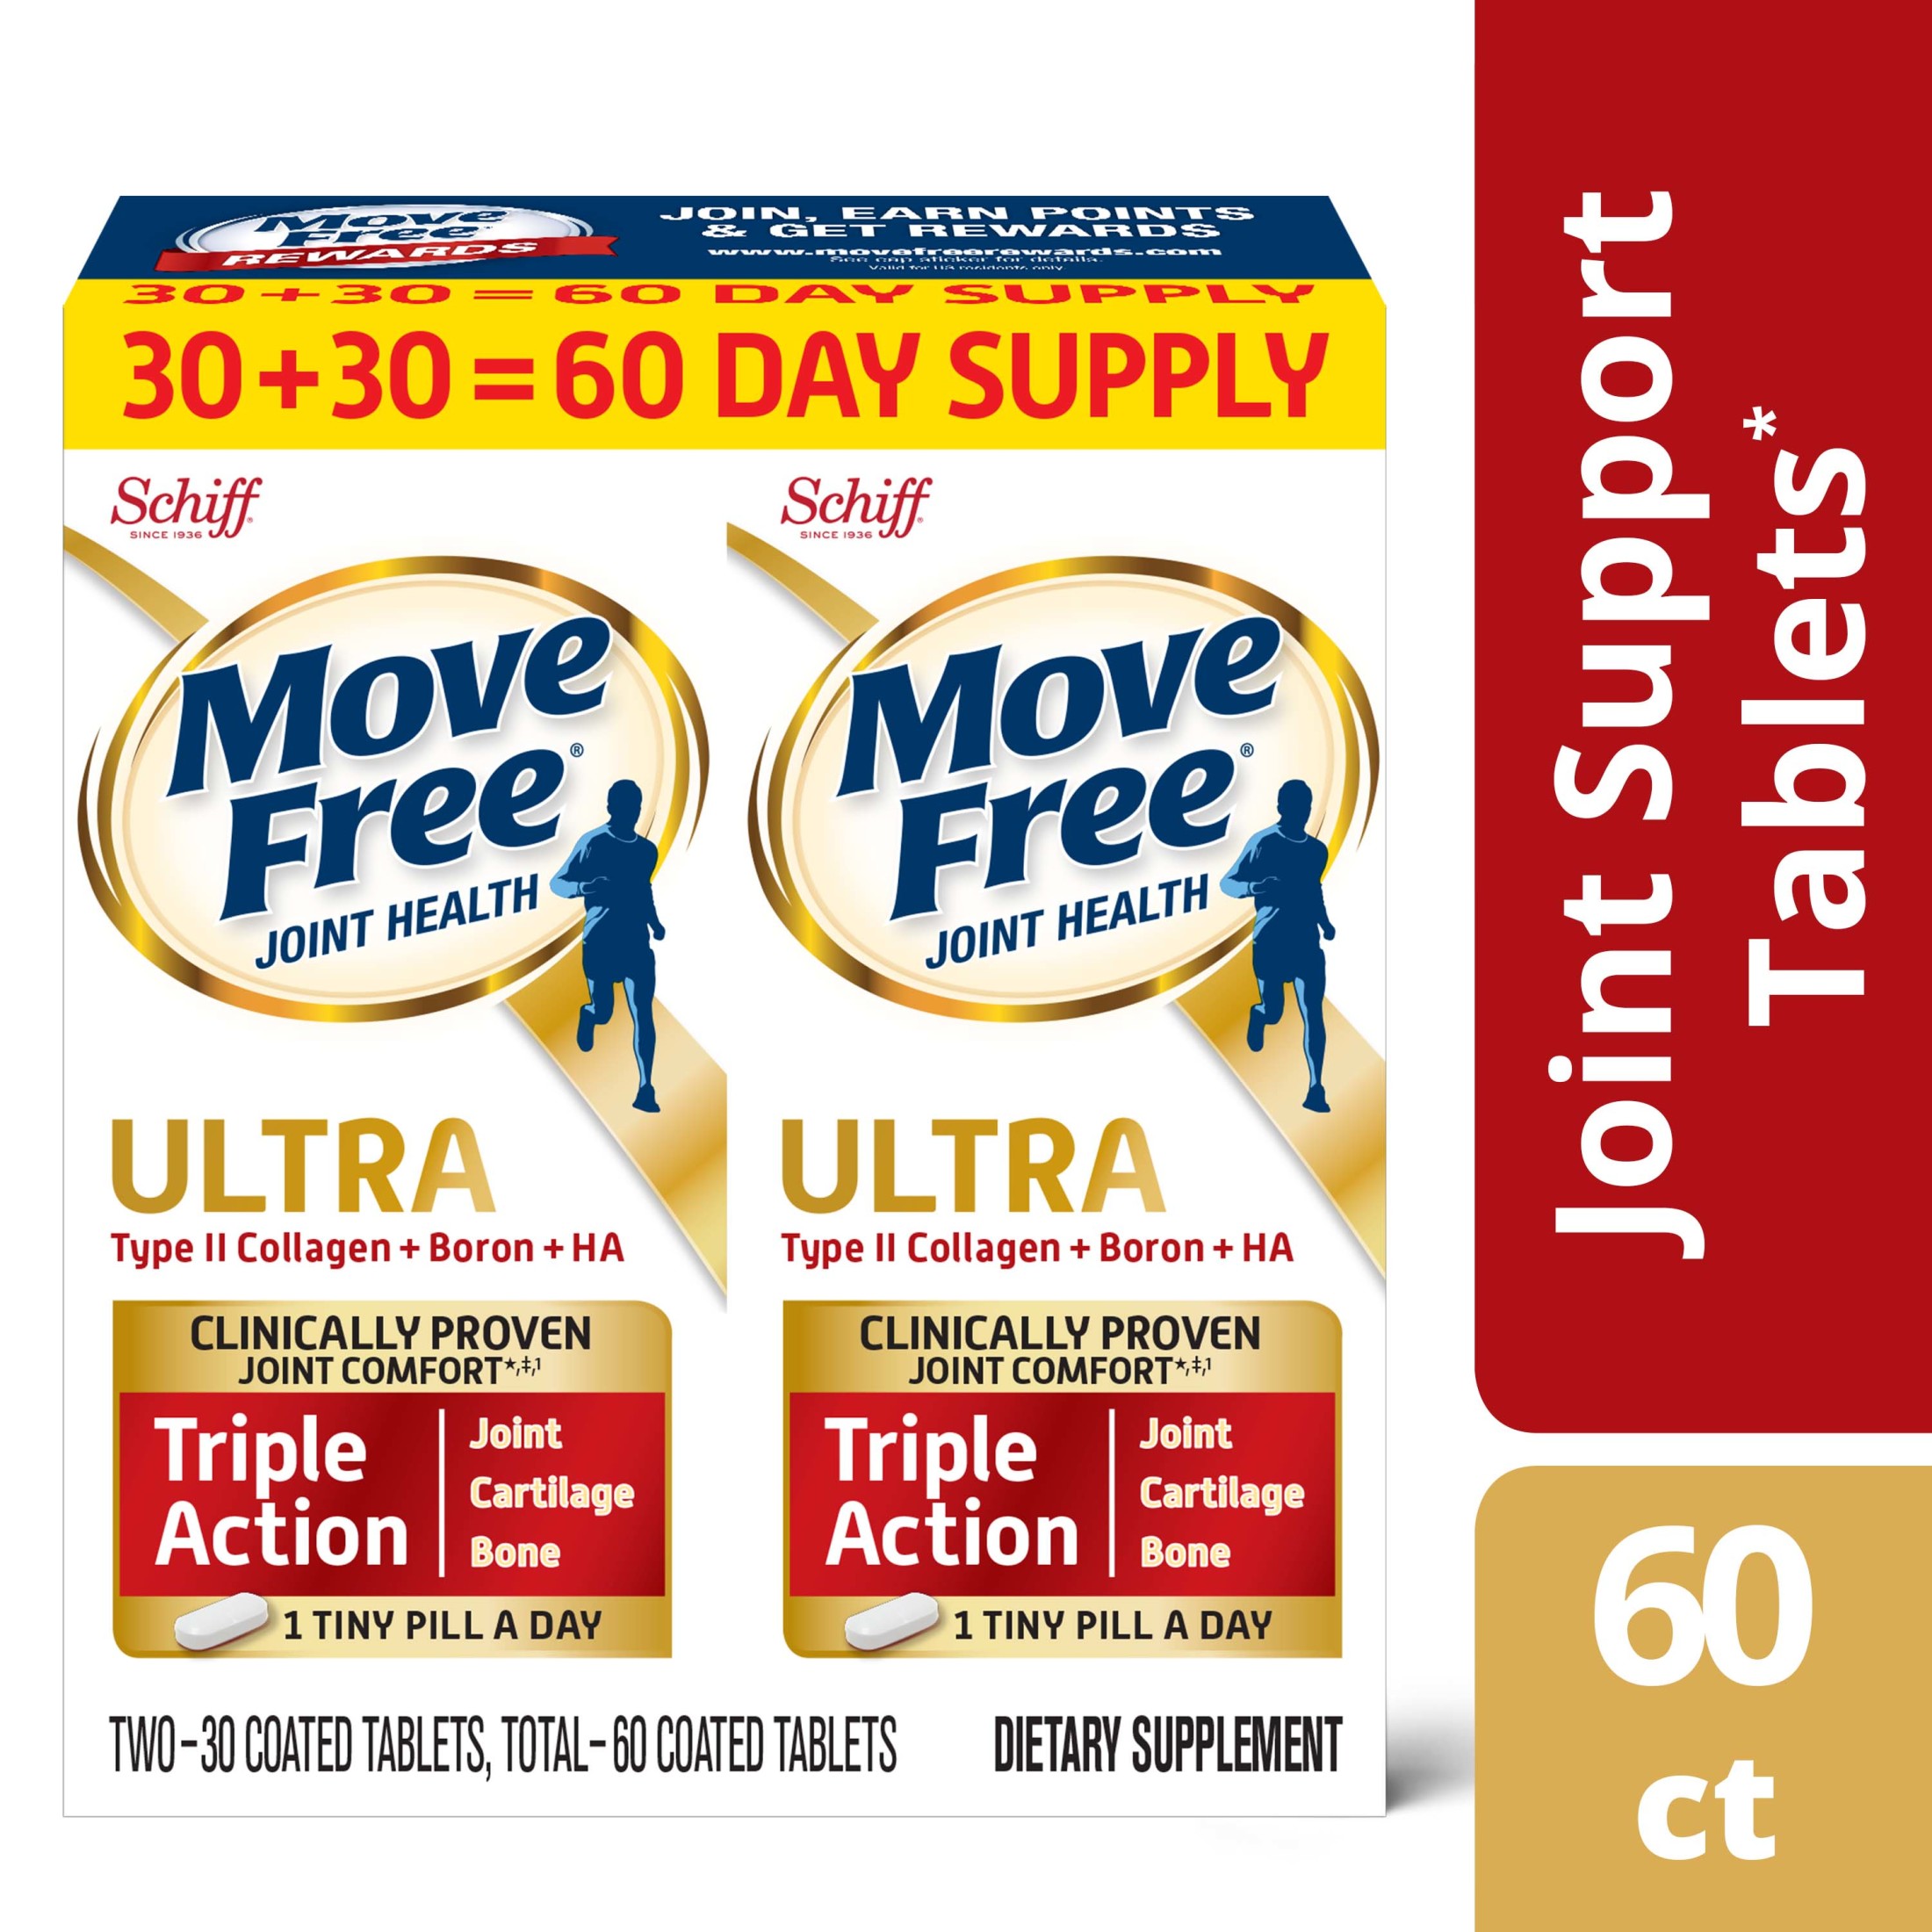 Move Free Ultra Triple Action Joint Support Tablets (60 count value pack), With Type II Collagen, Boron and HA, 1 Tiny Pill Per Day - image 1 of 5